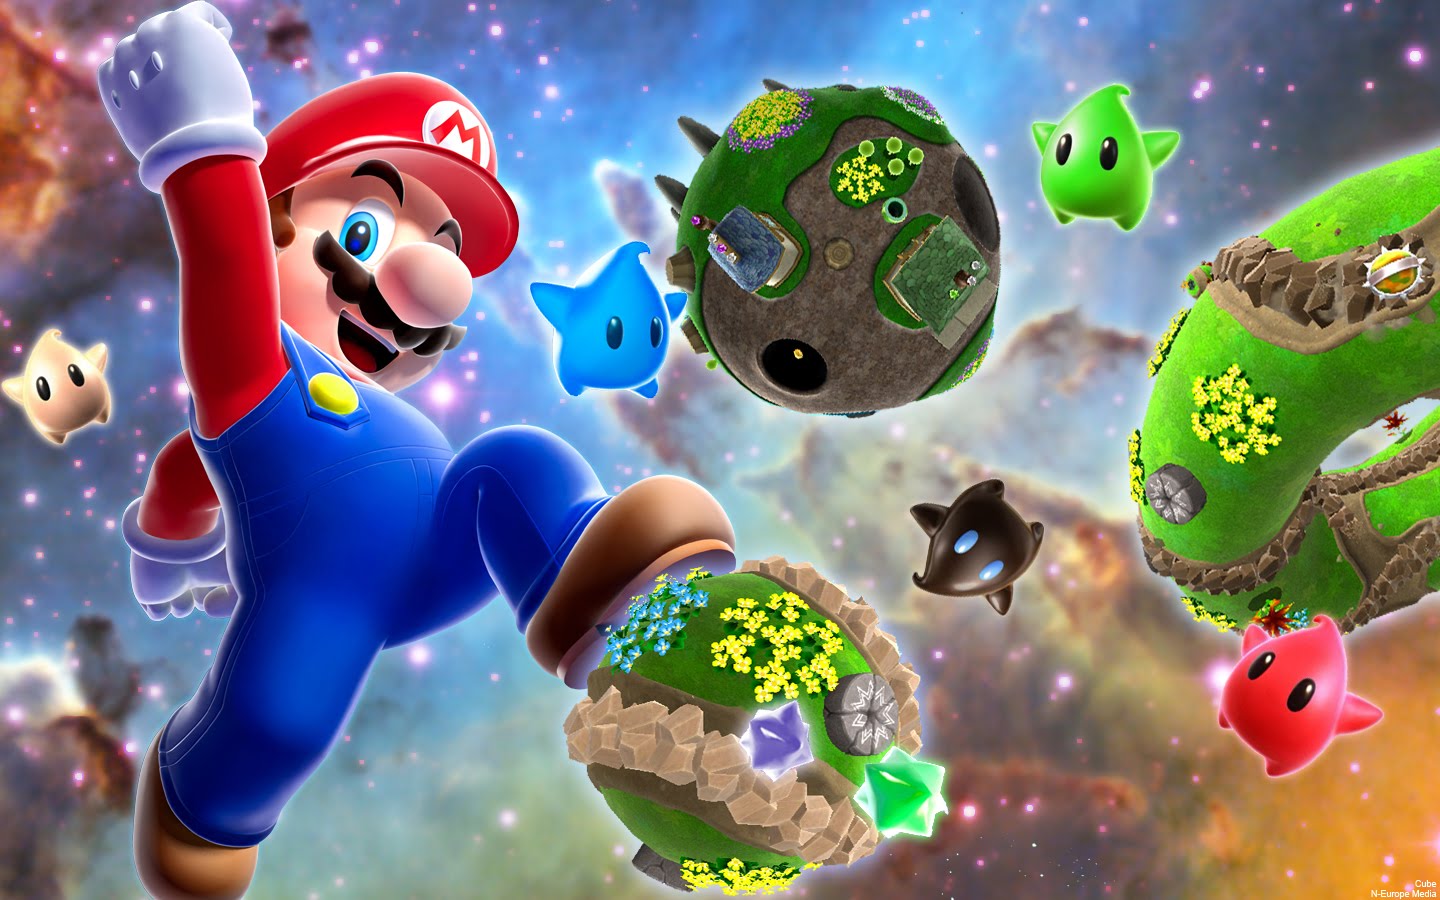 Five things you (possibly) didn't know about Mario